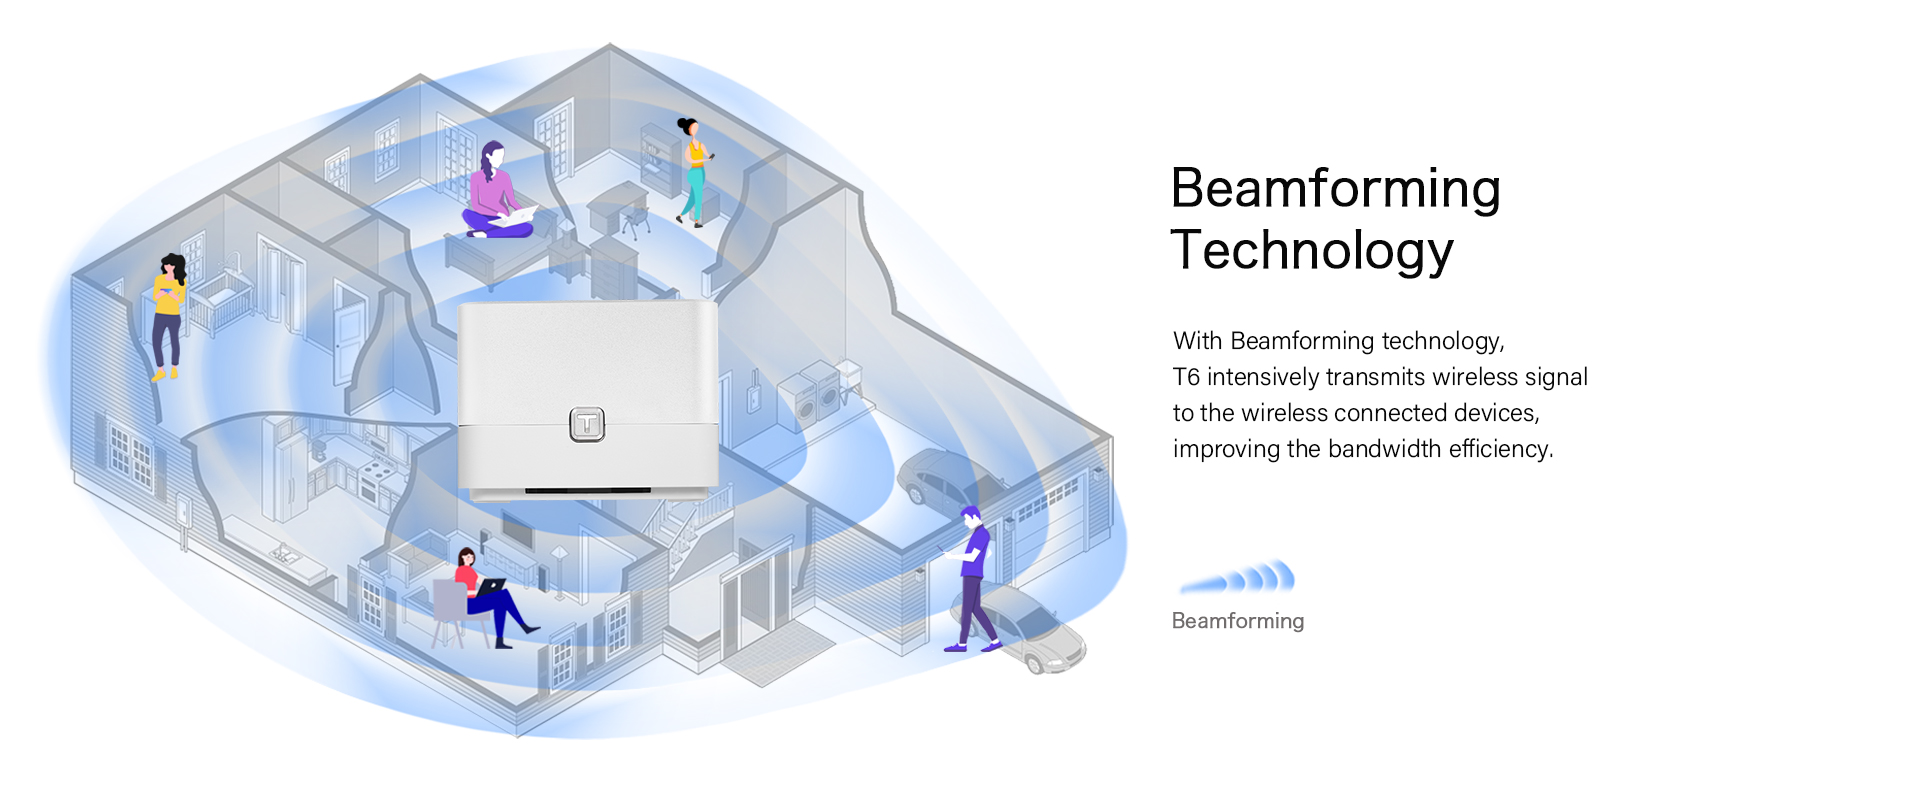 Beamforming Technology support